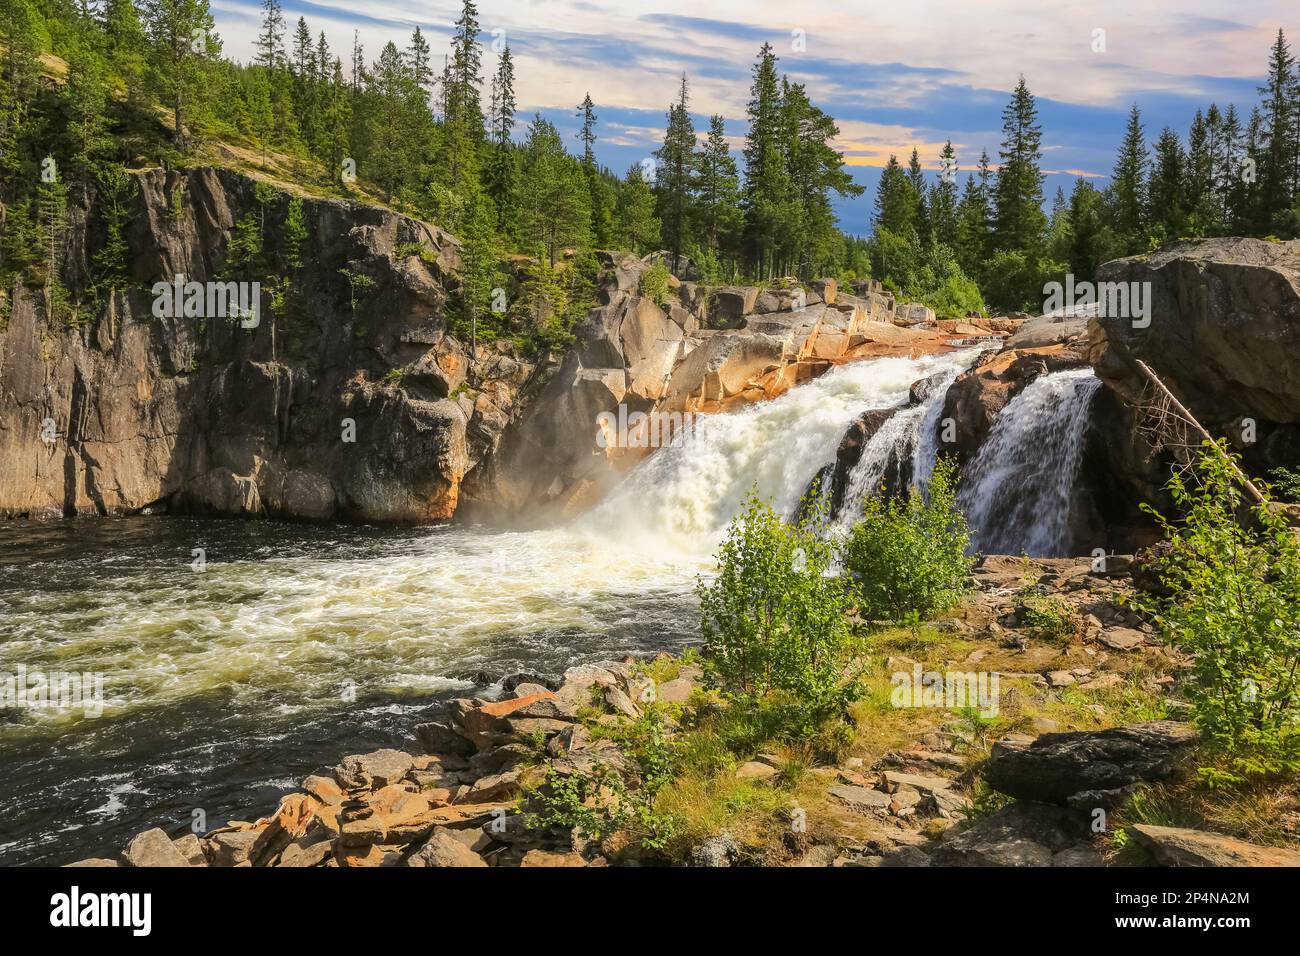 Stream  at the river Glomma  located in the central part of Norway Stock Photo